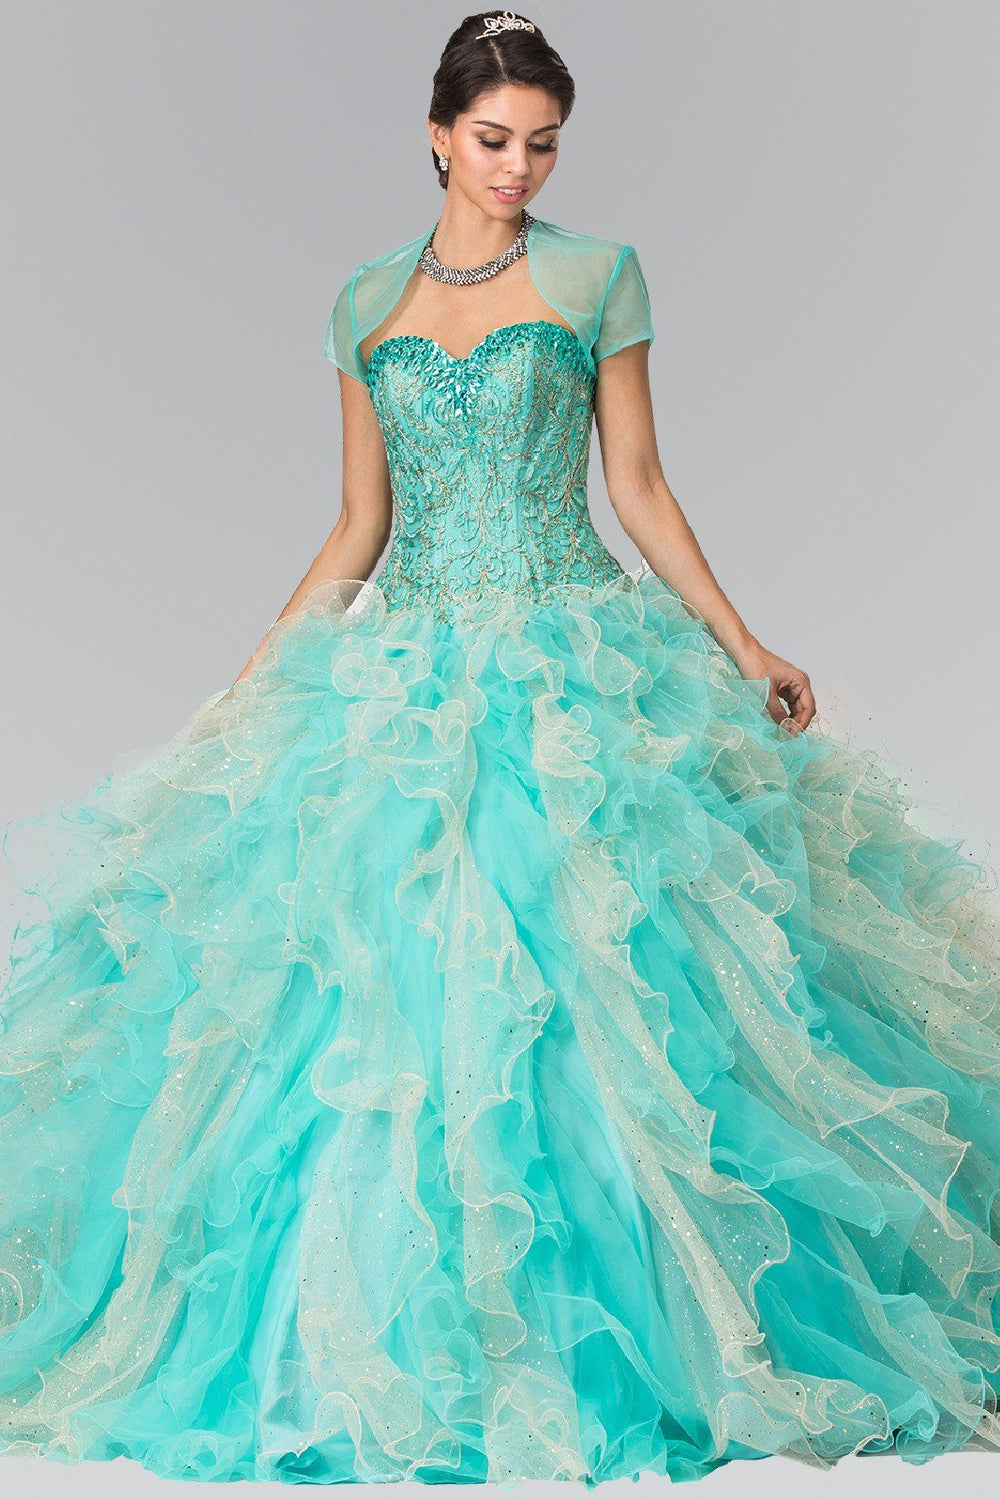 Bead Embroidered Strapless Ruffled Ballgown by Elizabeth K GL2210-Quinceanera Dresses-ABC Fashion